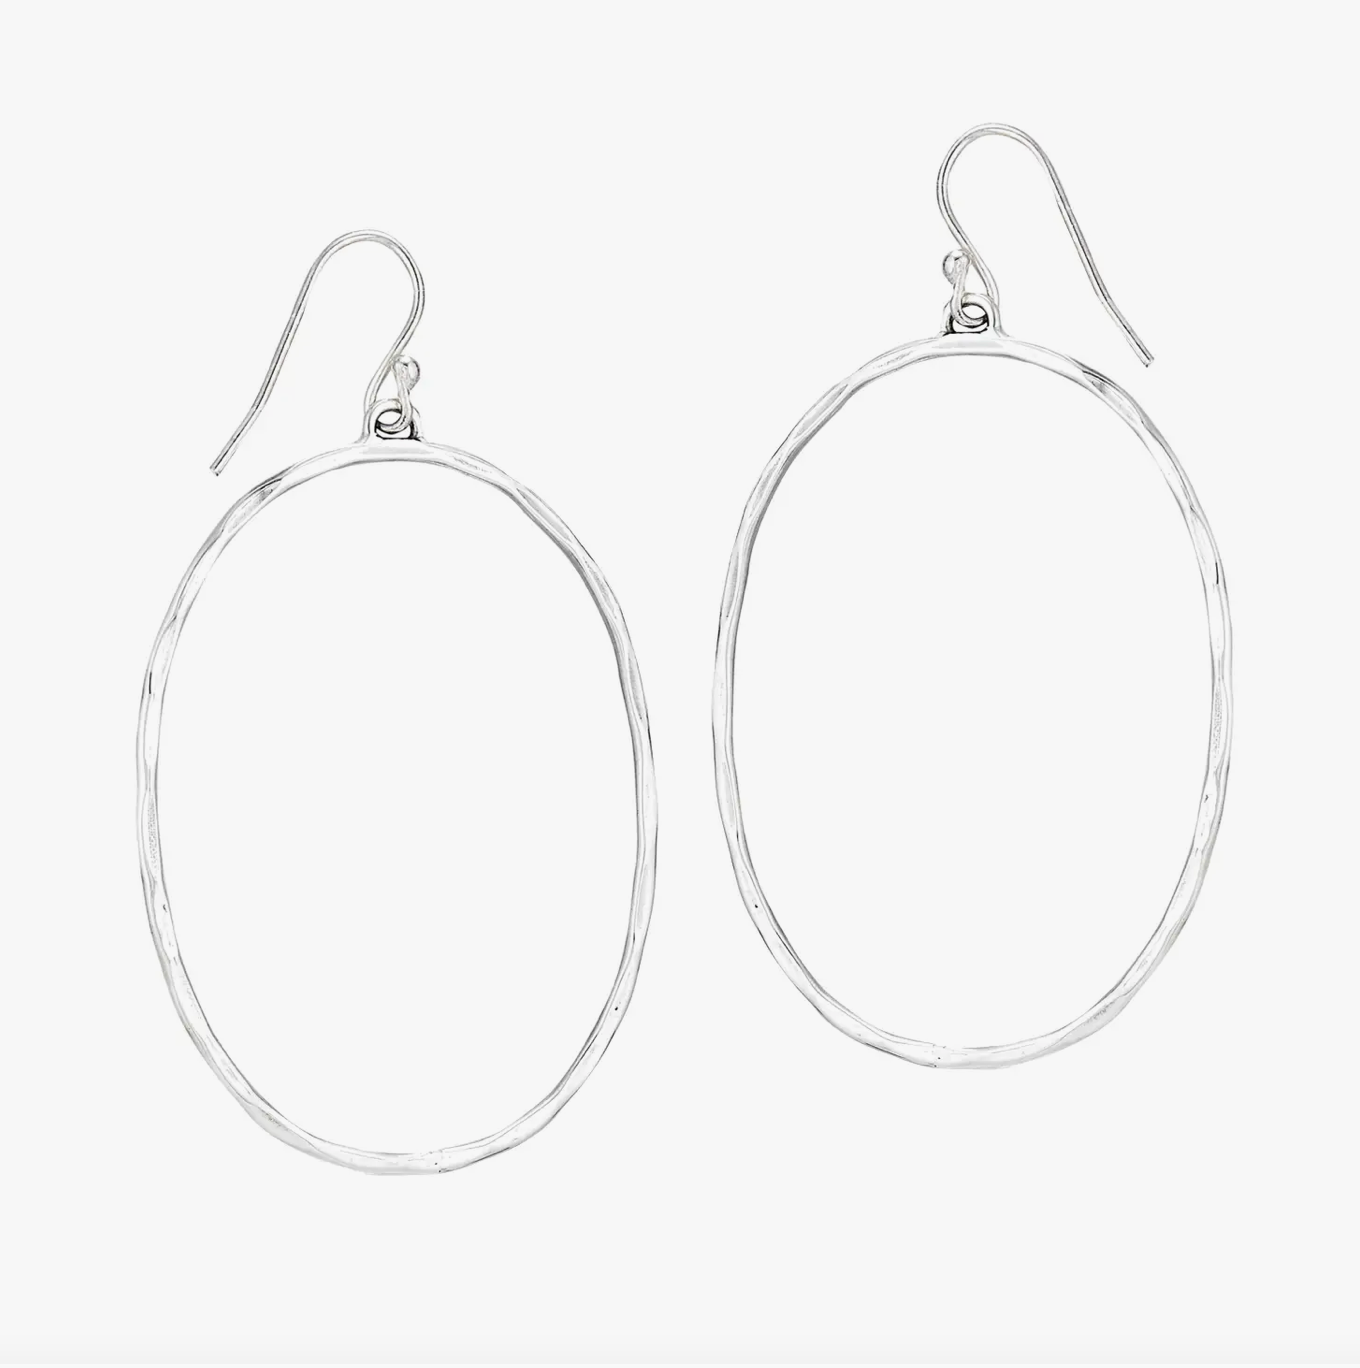 Hammered Oval Wire Earring